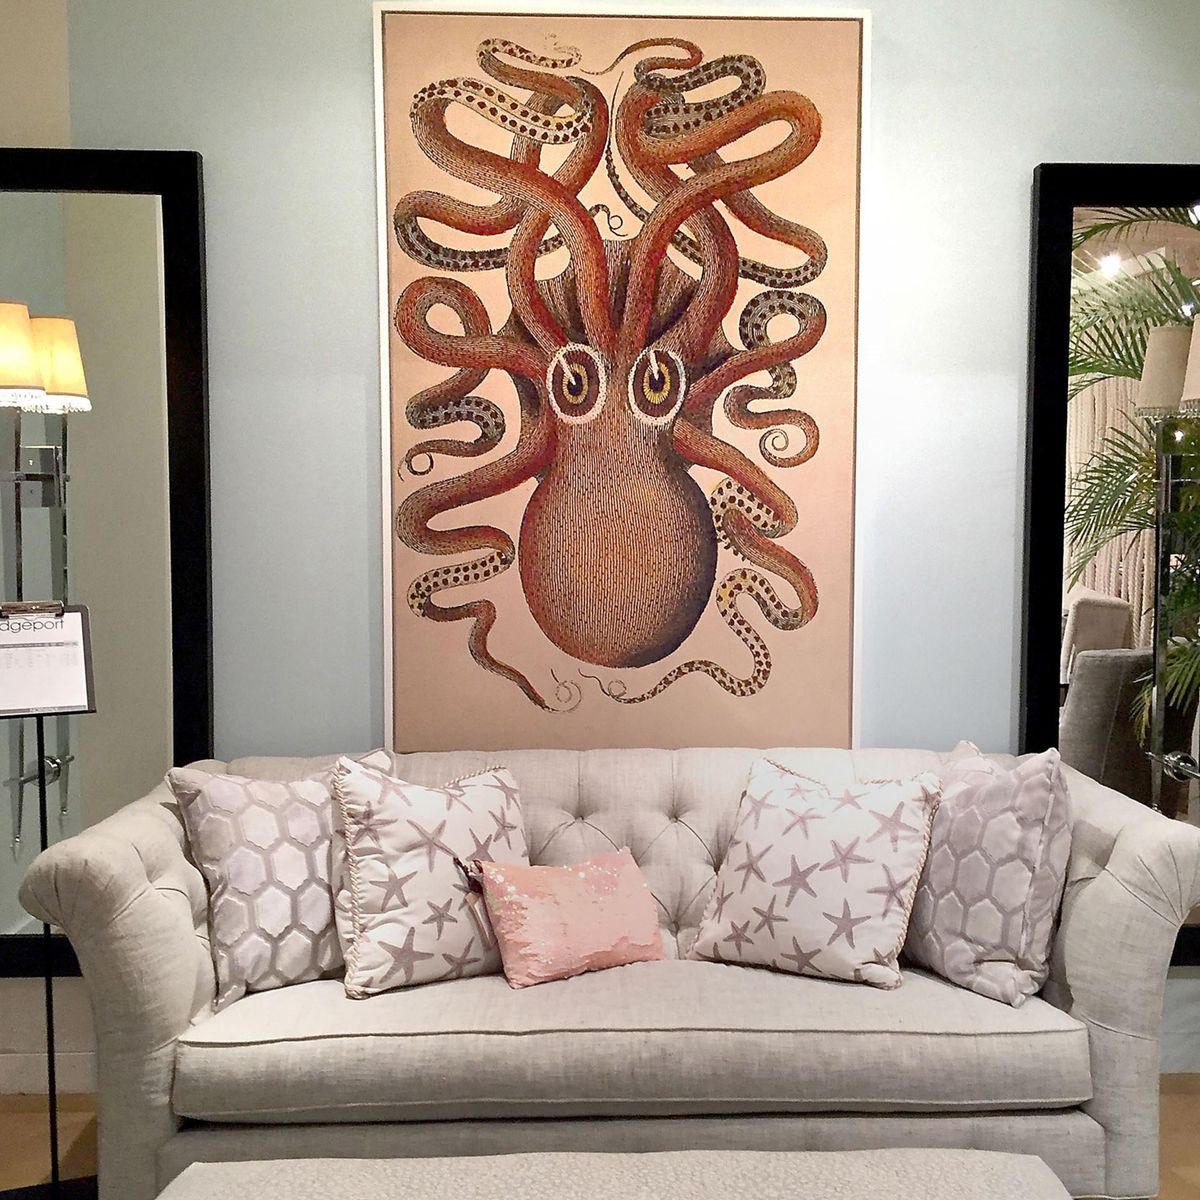 This cephalopod wall art hanging over the Norwalk Bridgeport sofa is by Kelly O’Neal for Design Legacy. It was created for Norwalk Furniture. (Patricia Sheridan / TNS)